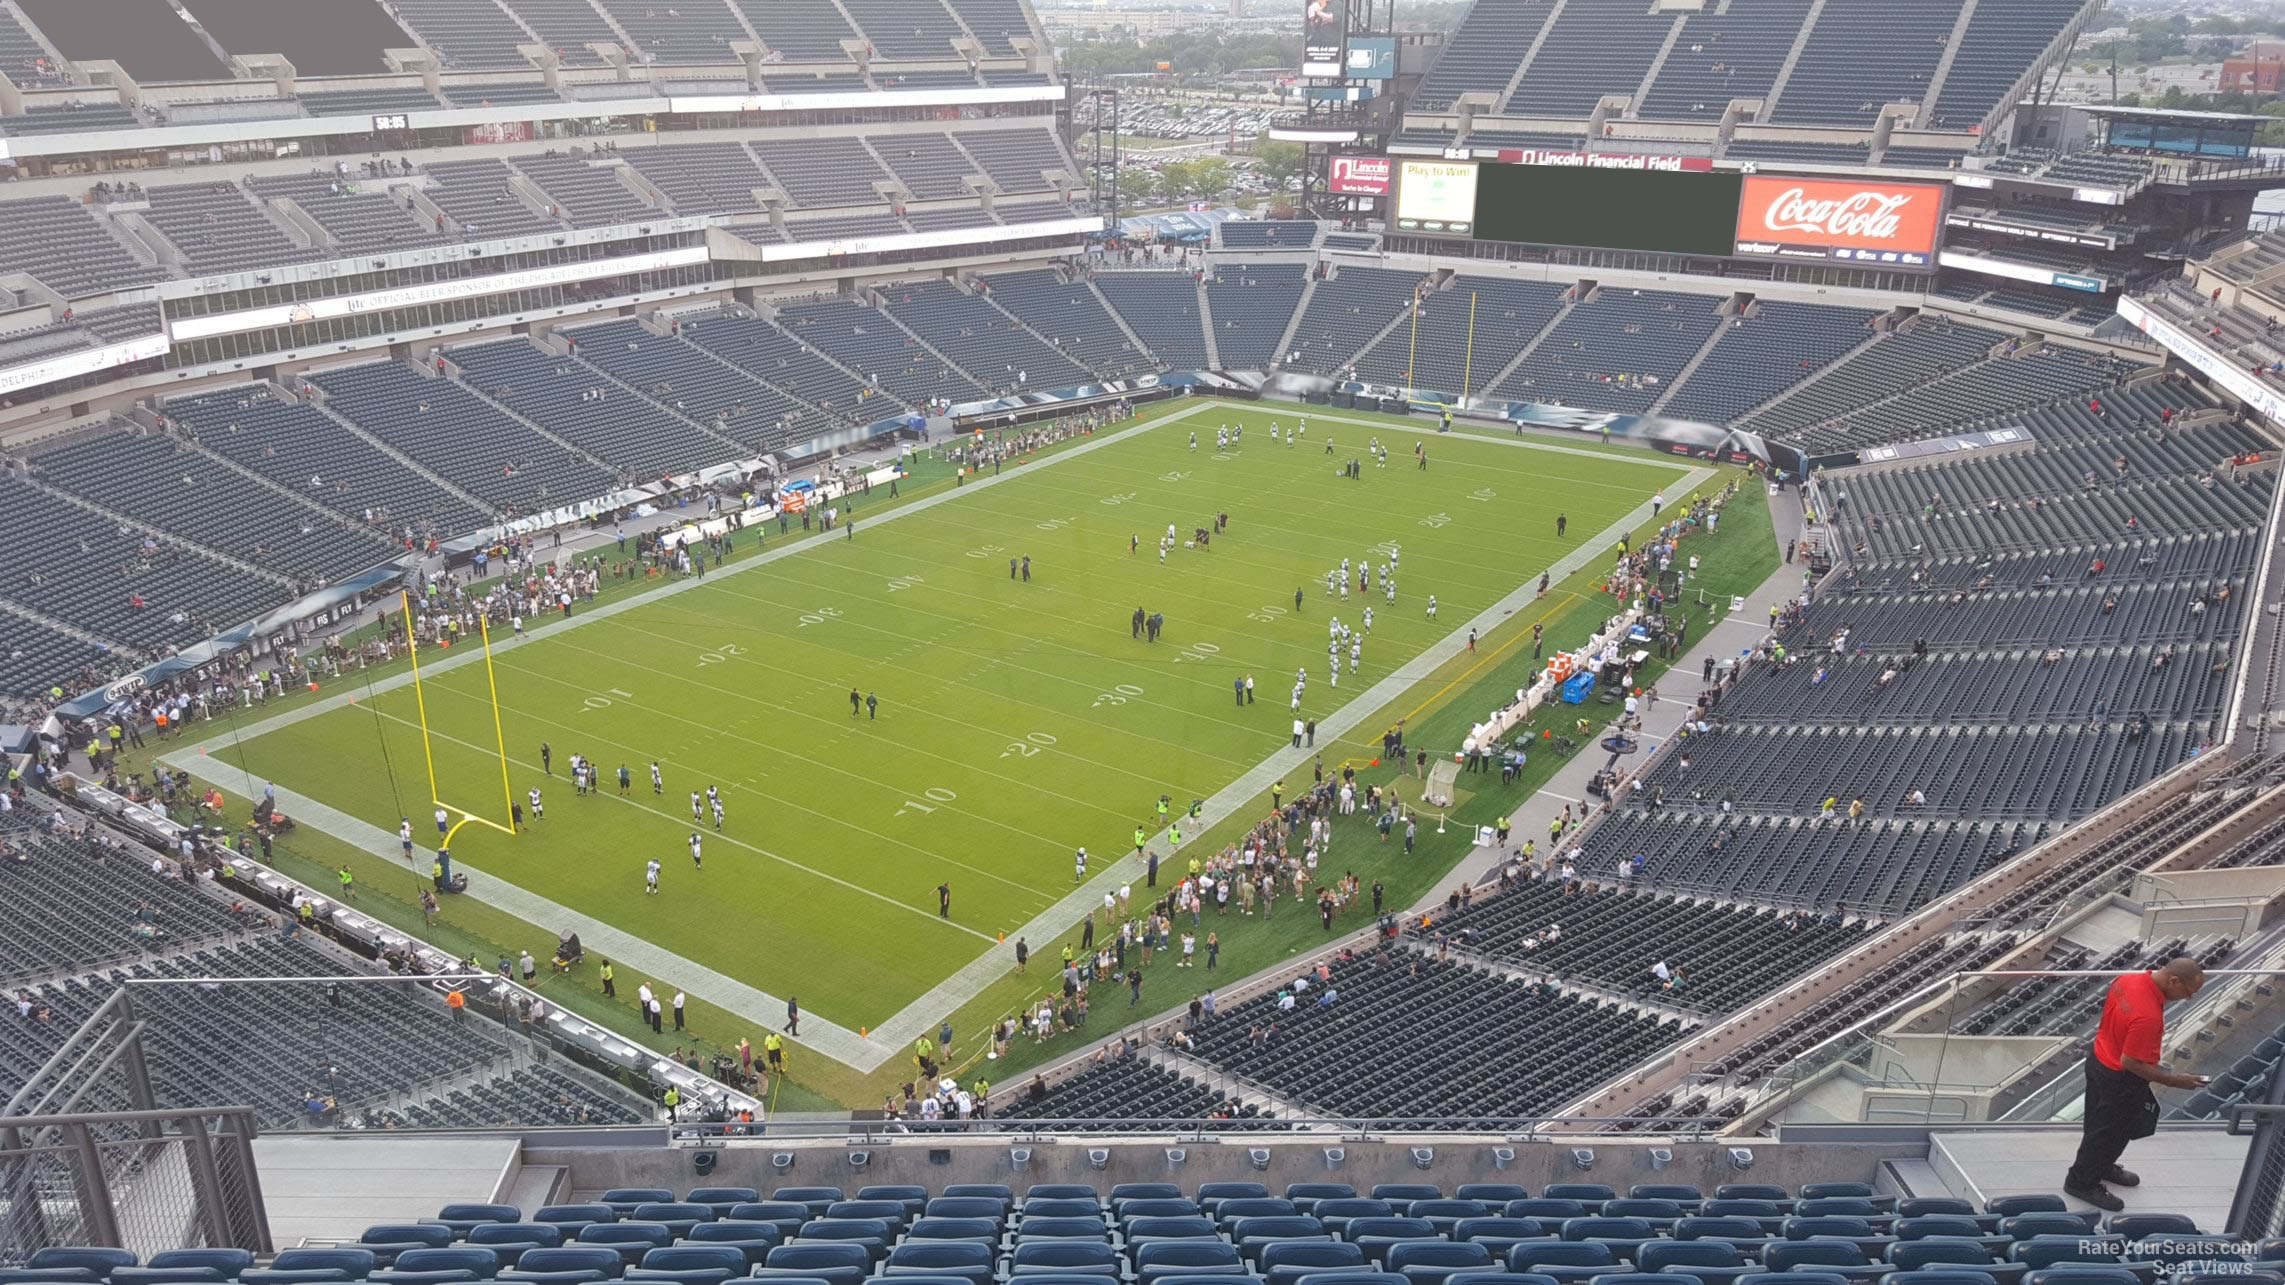 section 218, row 15 seat view  for football - lincoln financial field